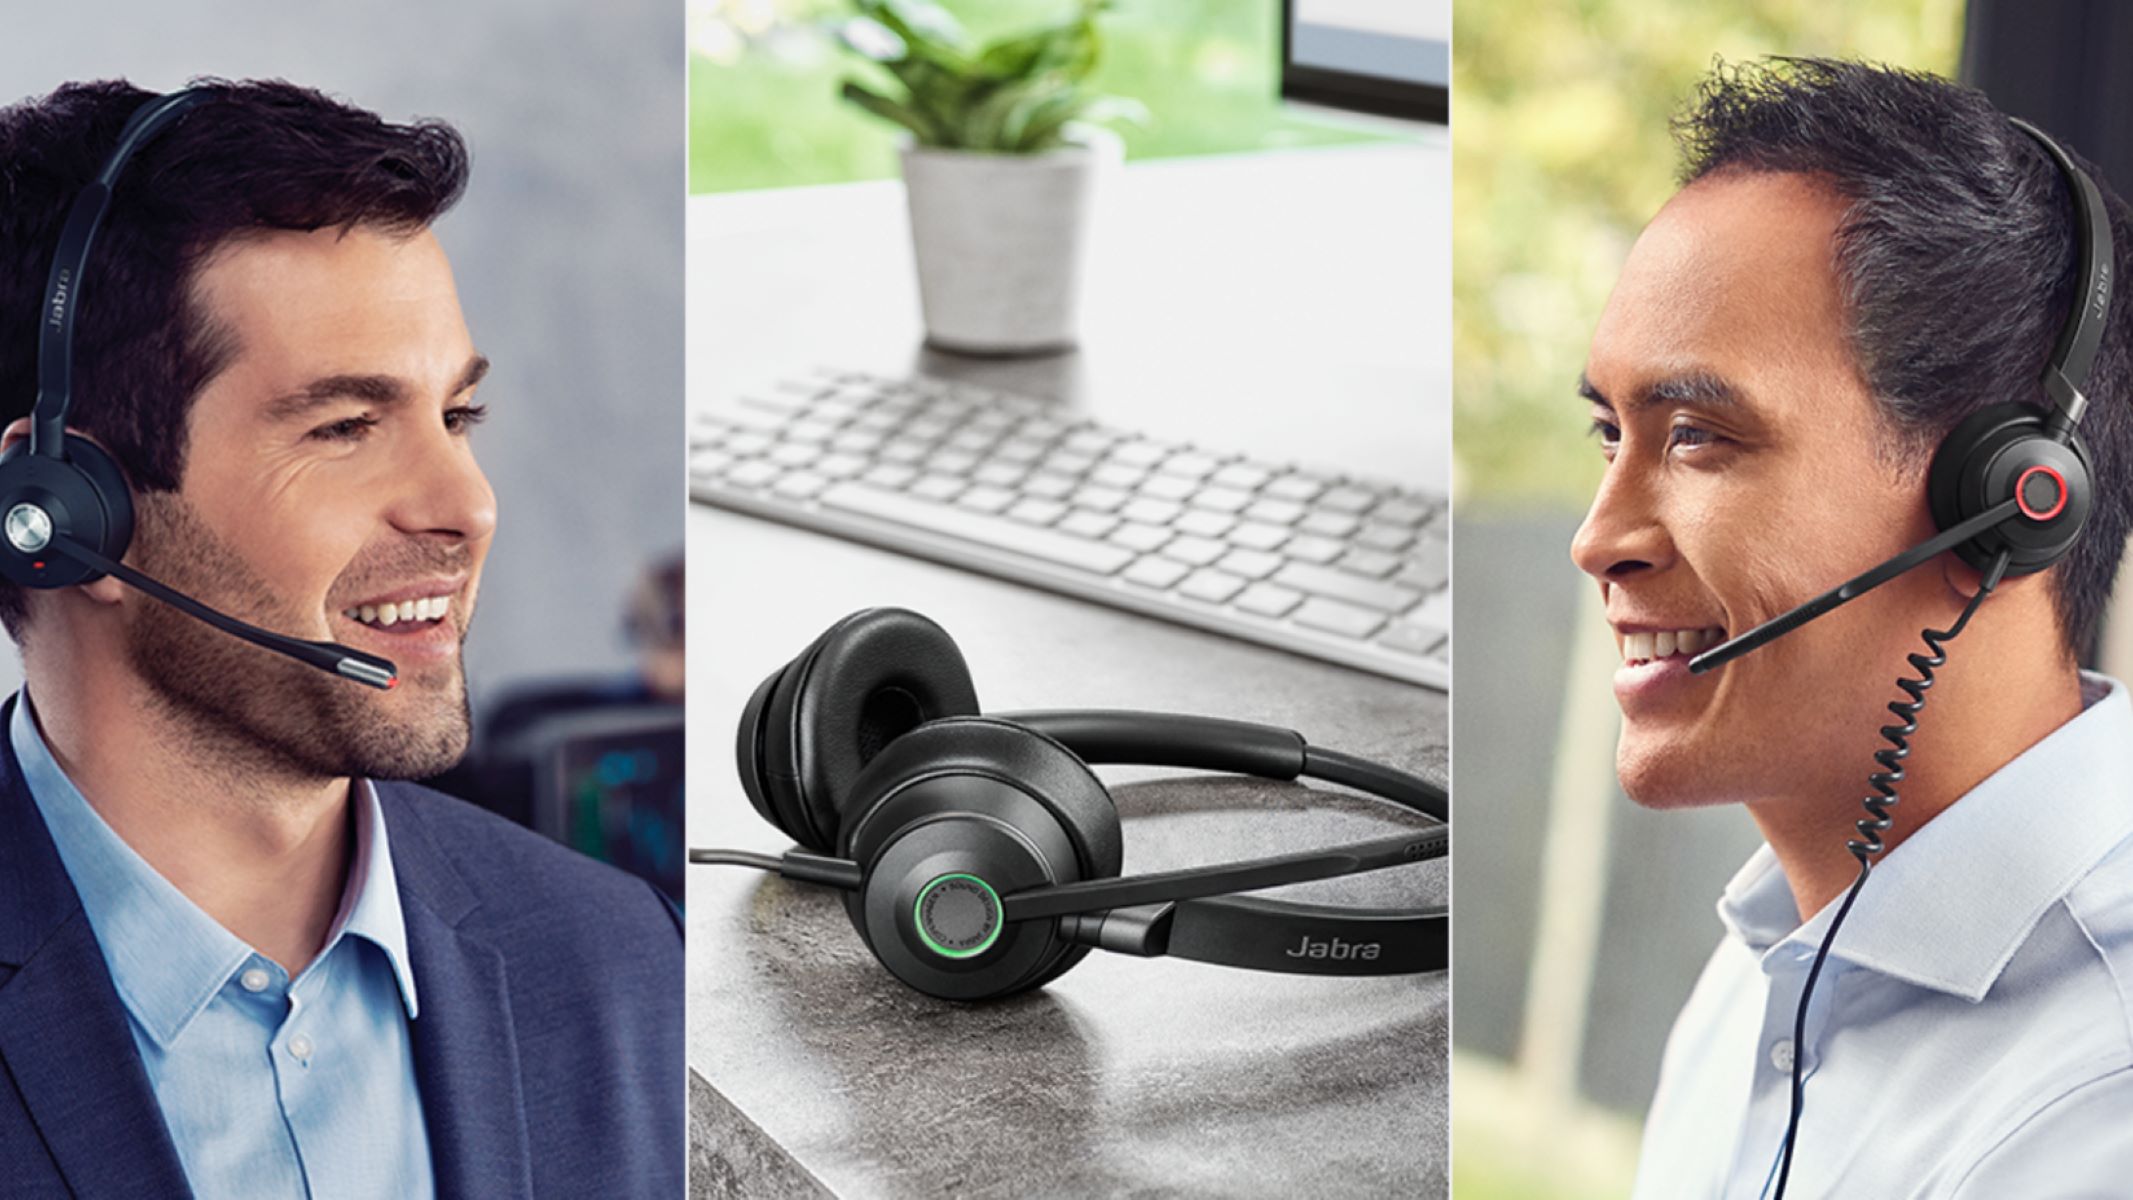 Pairing Jabra Headset With Your Computer